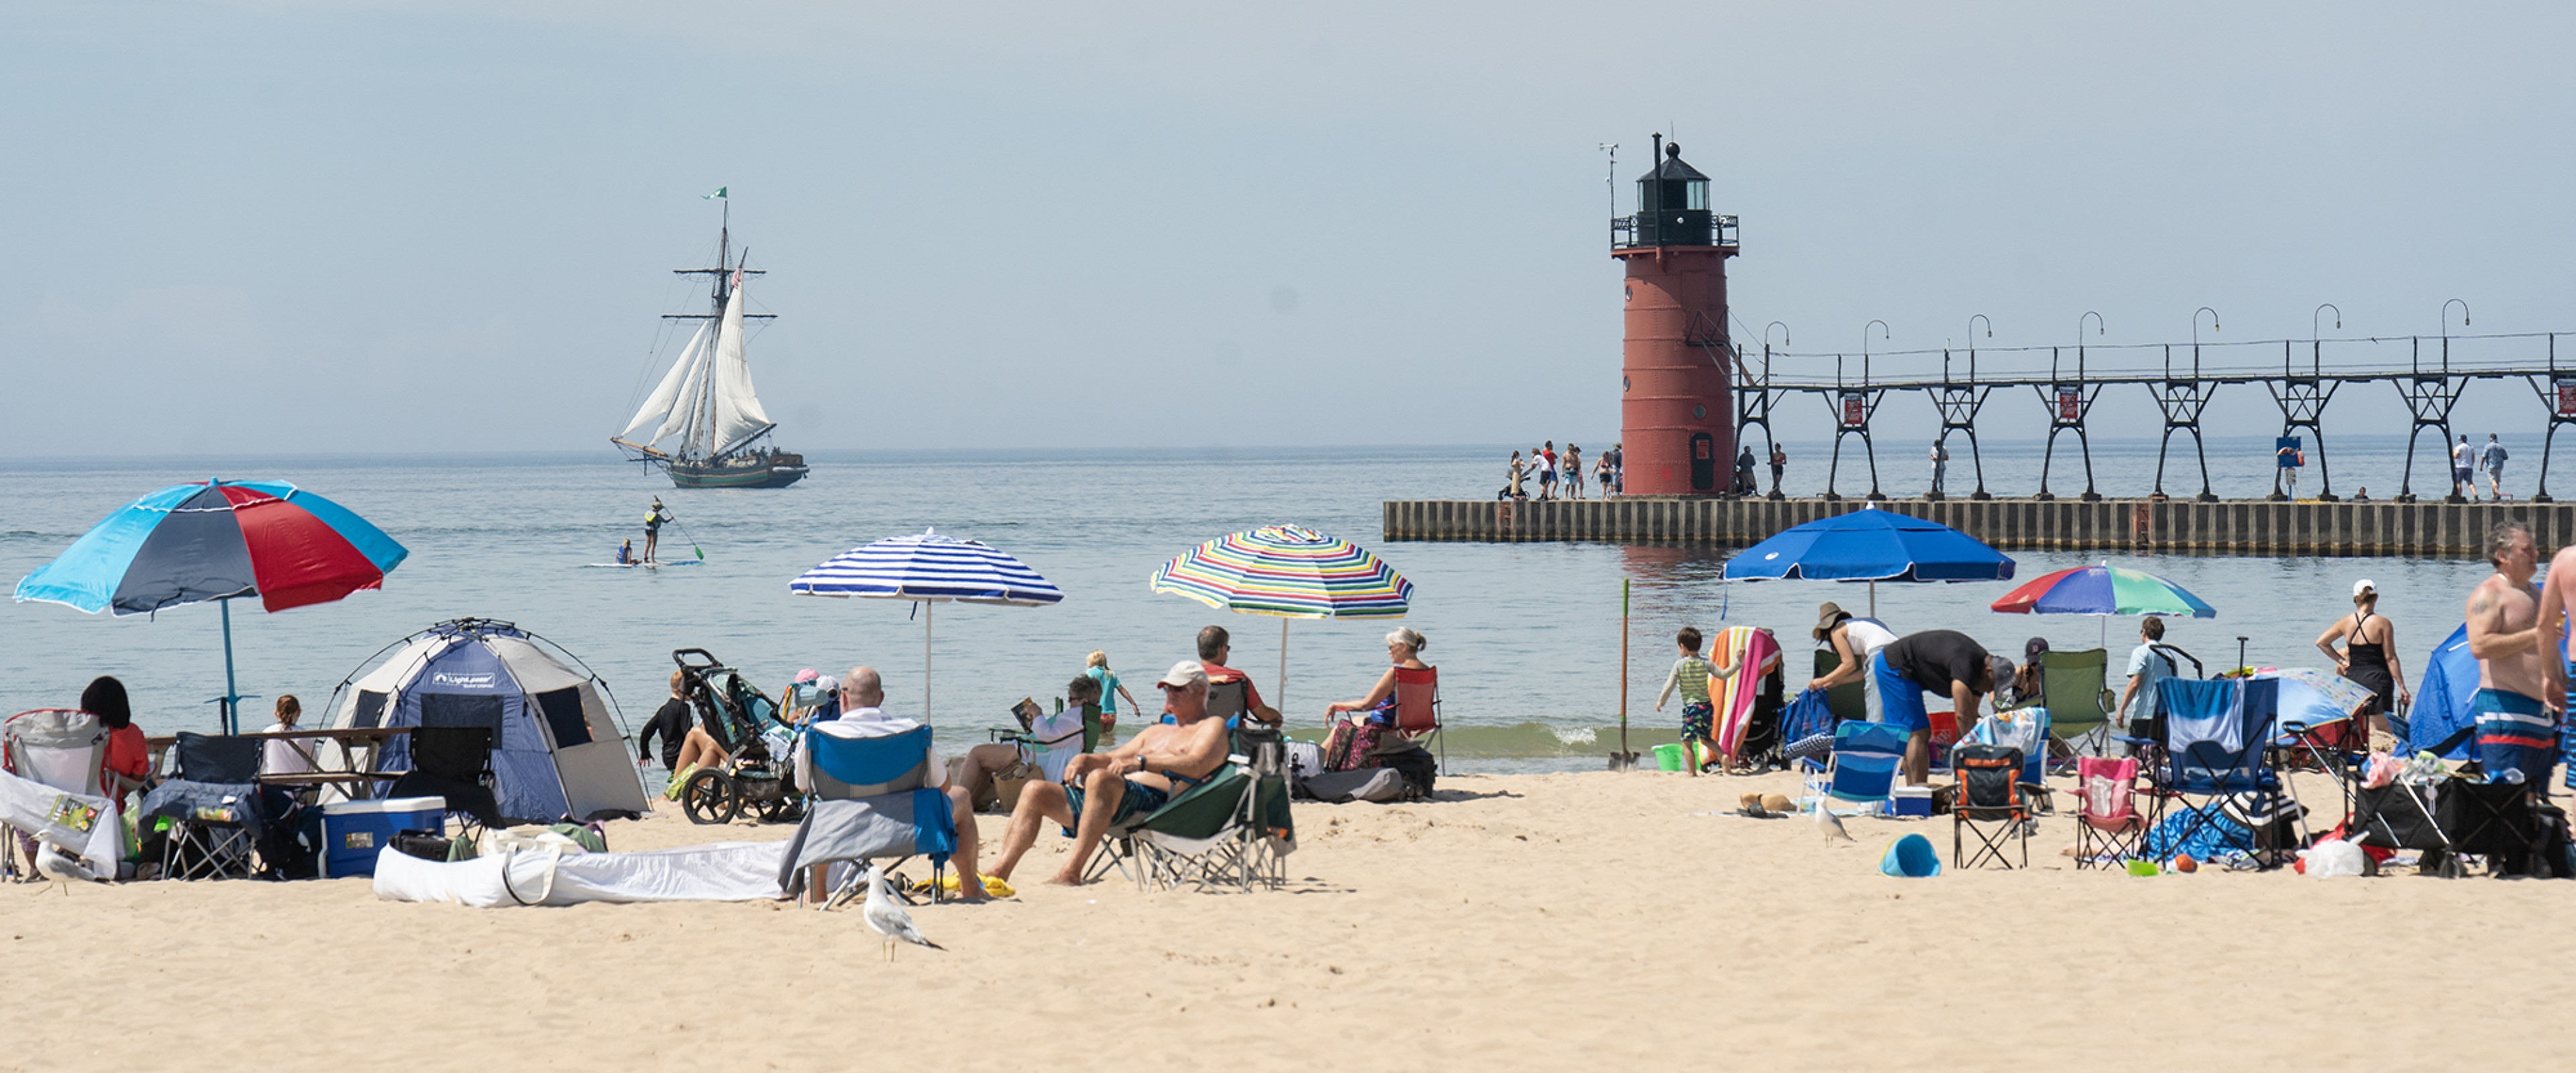 Popular Lake Michigan beach, South Haven, pier and lighthouse visable beyond the crowded beach.